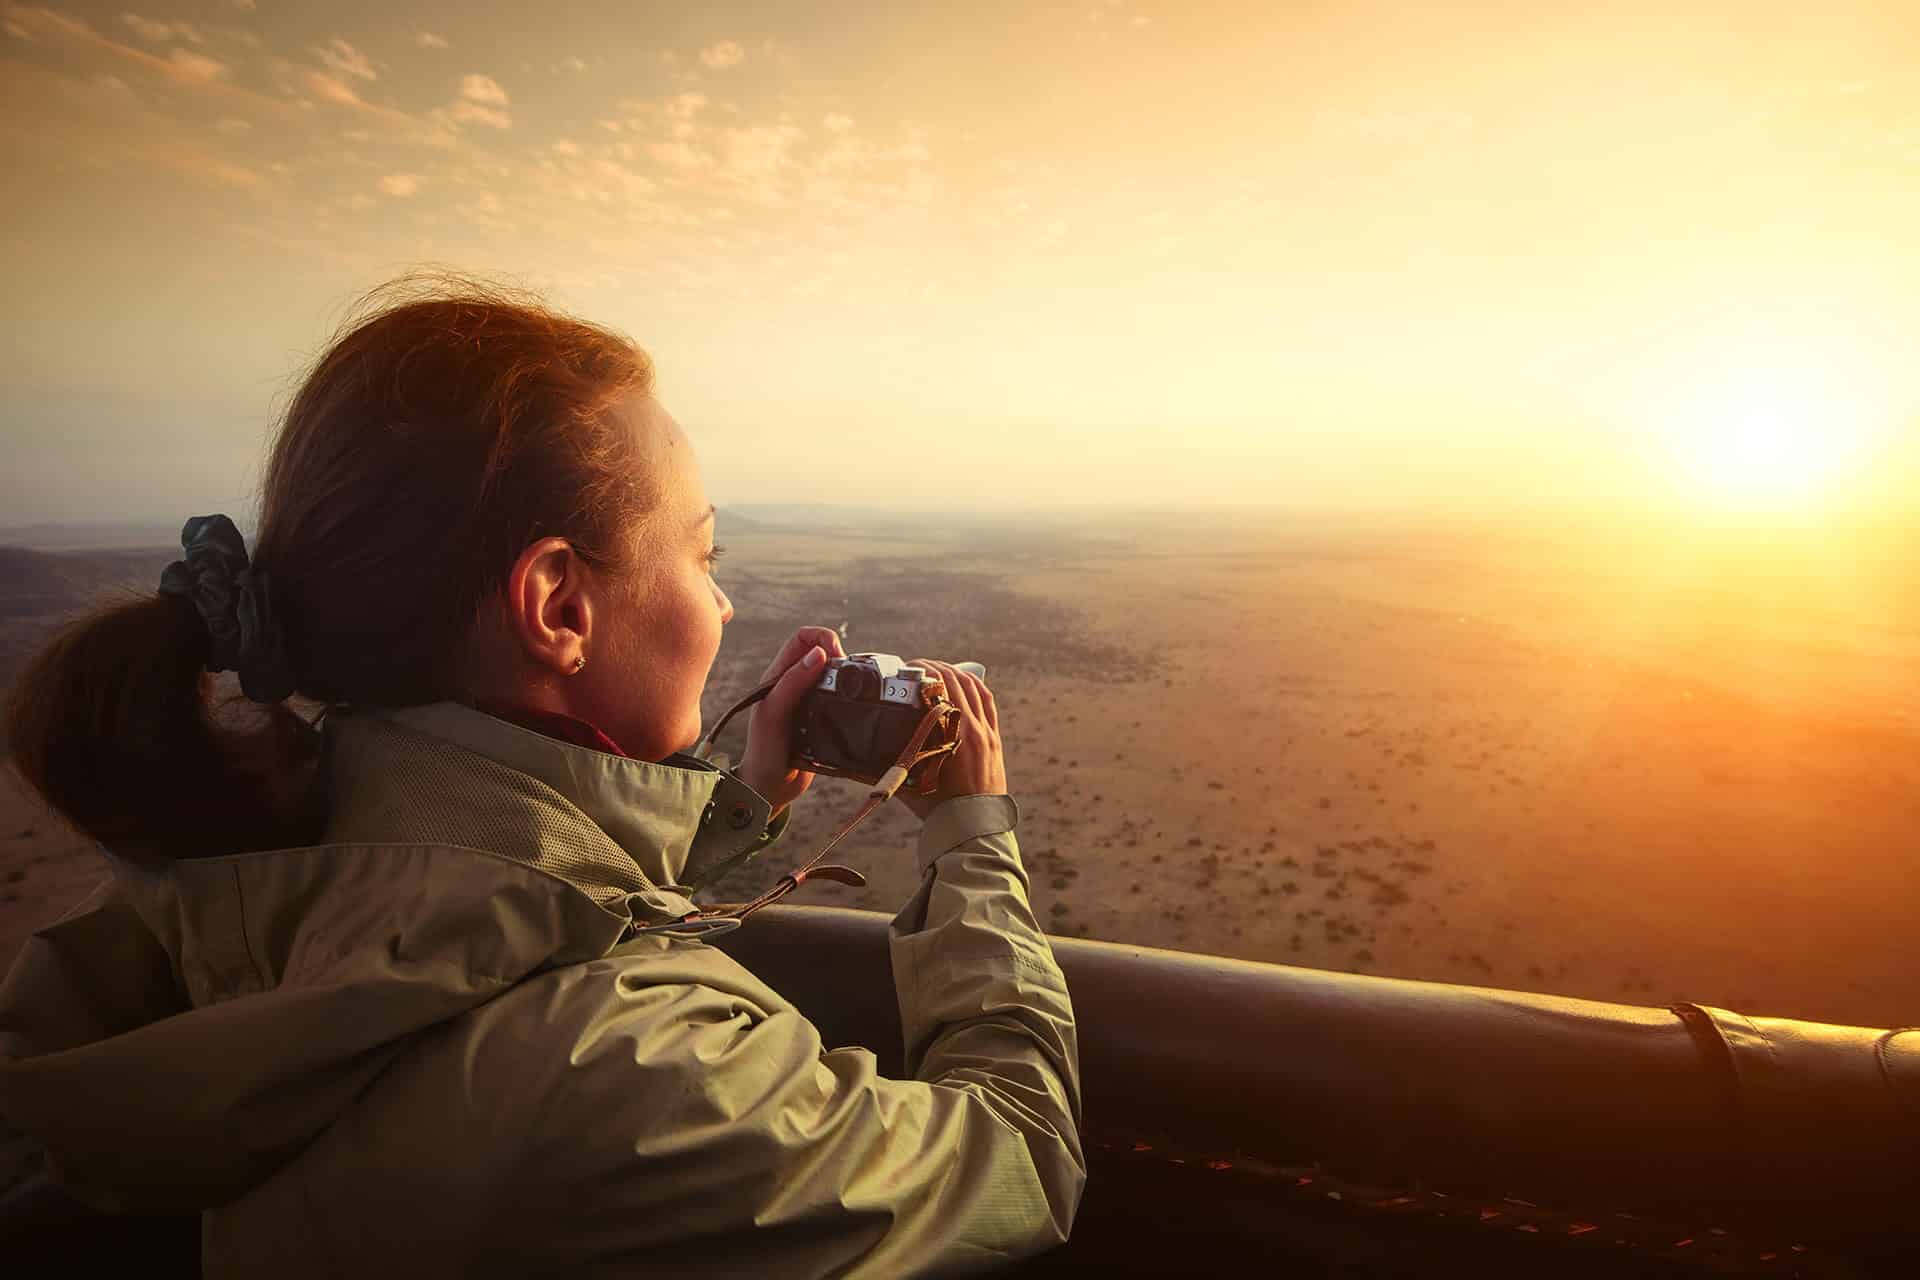 Lady taking a picture from a hot air balloon in the early morning